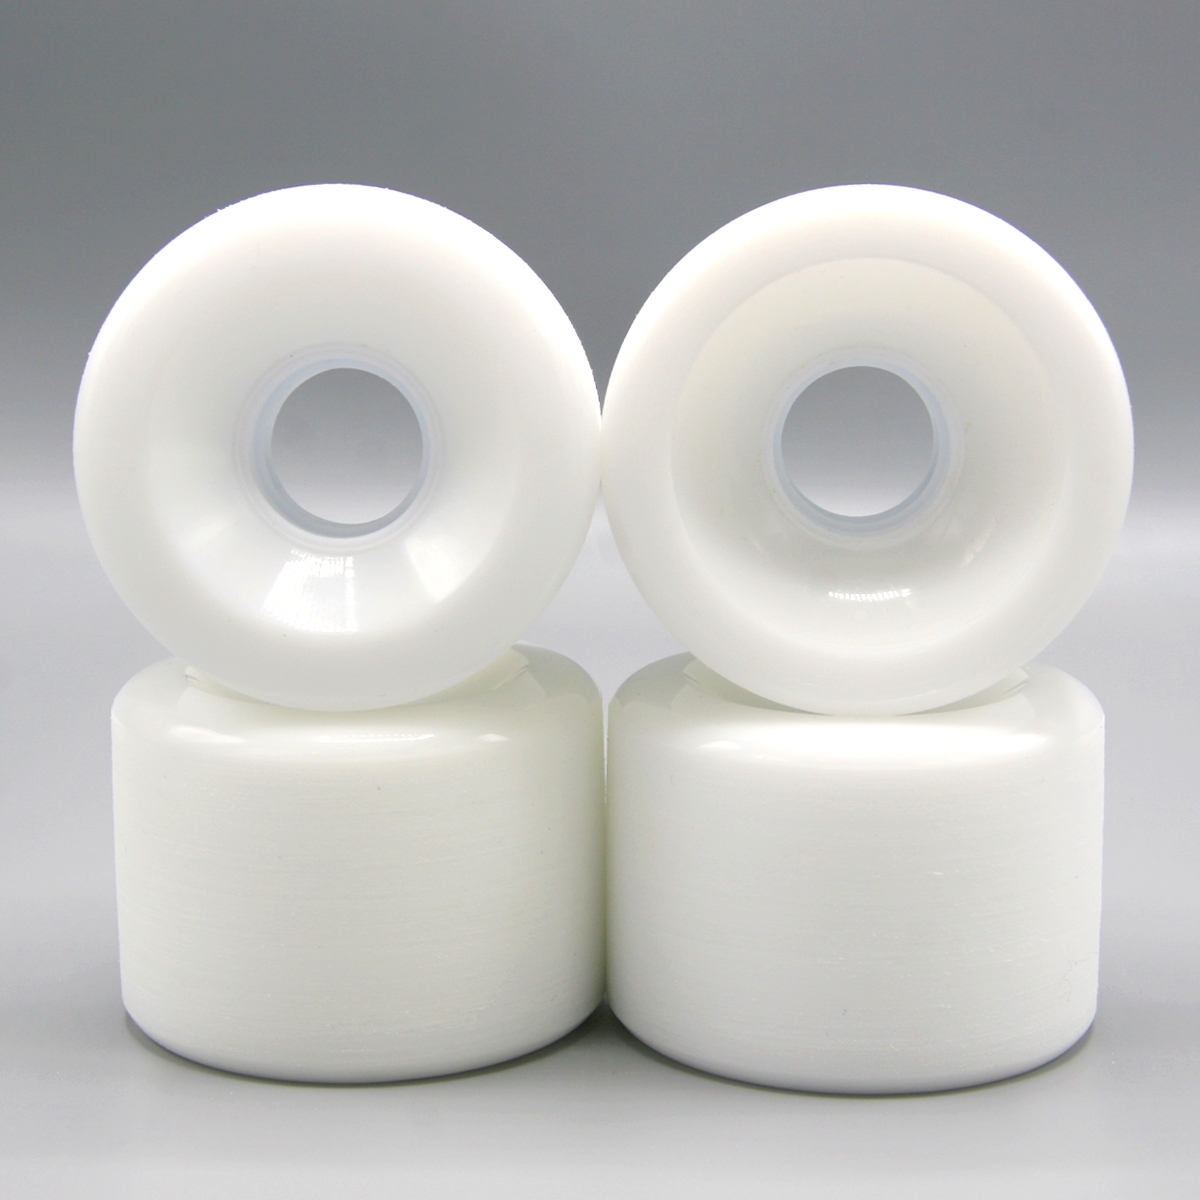 Blank 65mm (Solid White) - Includes 1/4" Risers